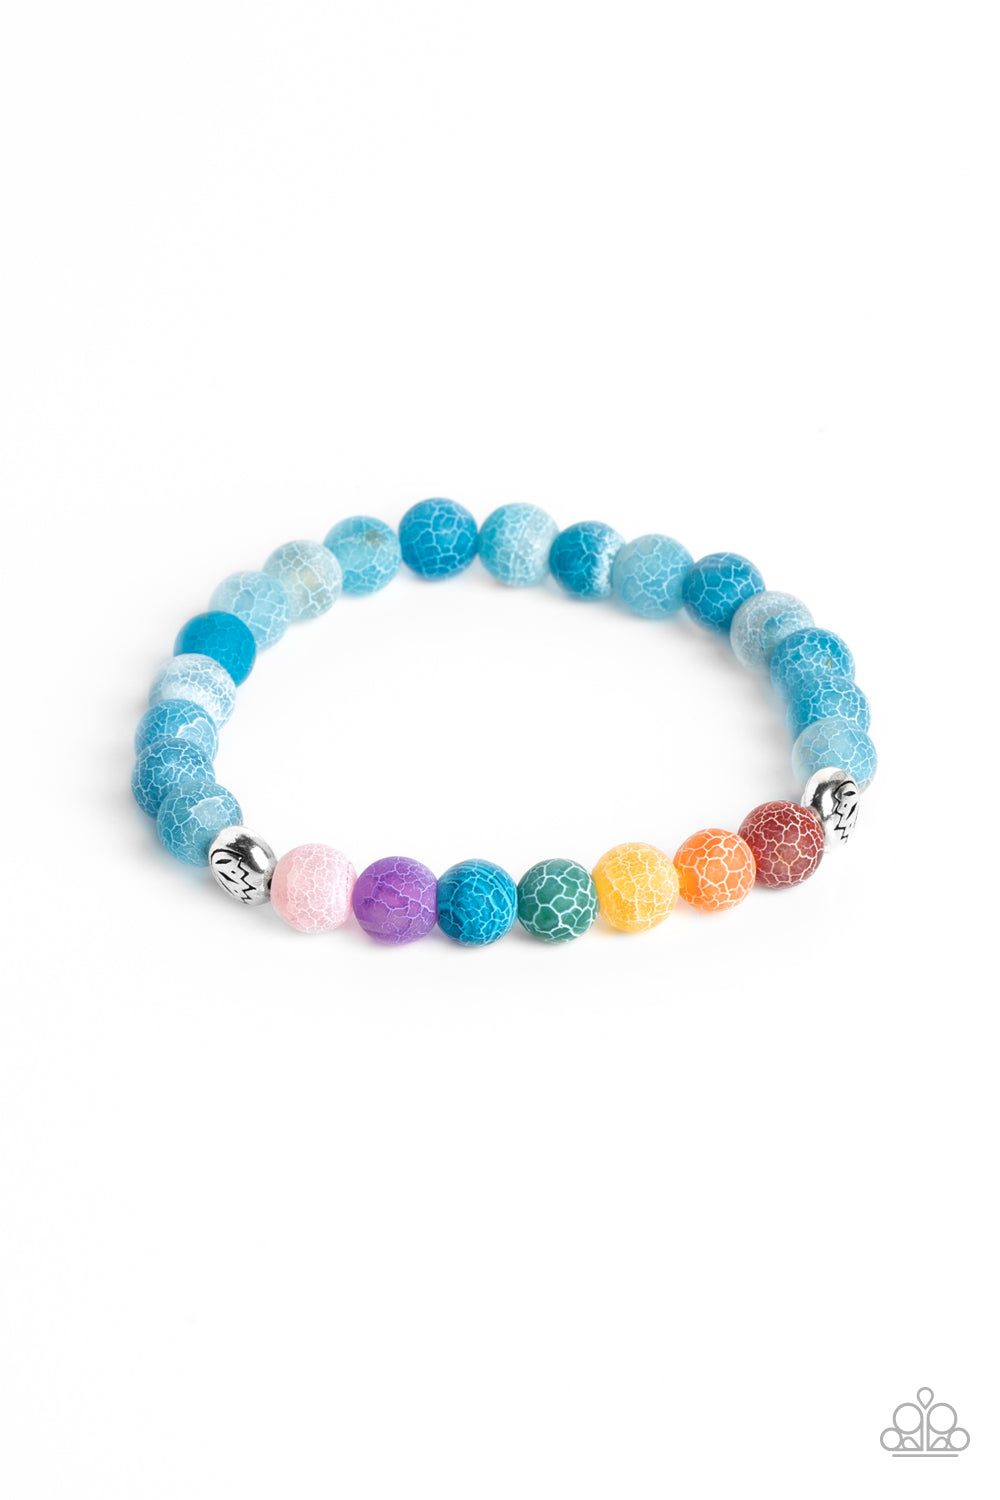 Lotus Chakra Blue Unisex Stretch Bracelet - Paparazzi Accessories  A collection of refreshing blue stone beads with speckled detailing, and stone beads brushed in the shades of the rainbow are threaded along a stretchy band around the wrist for a seasonal finish. Separating the chakra-inspired stones from the refreshing blue stones, two silver beads, stamped with a lotus flower outline add a floral feature to the urban design. 